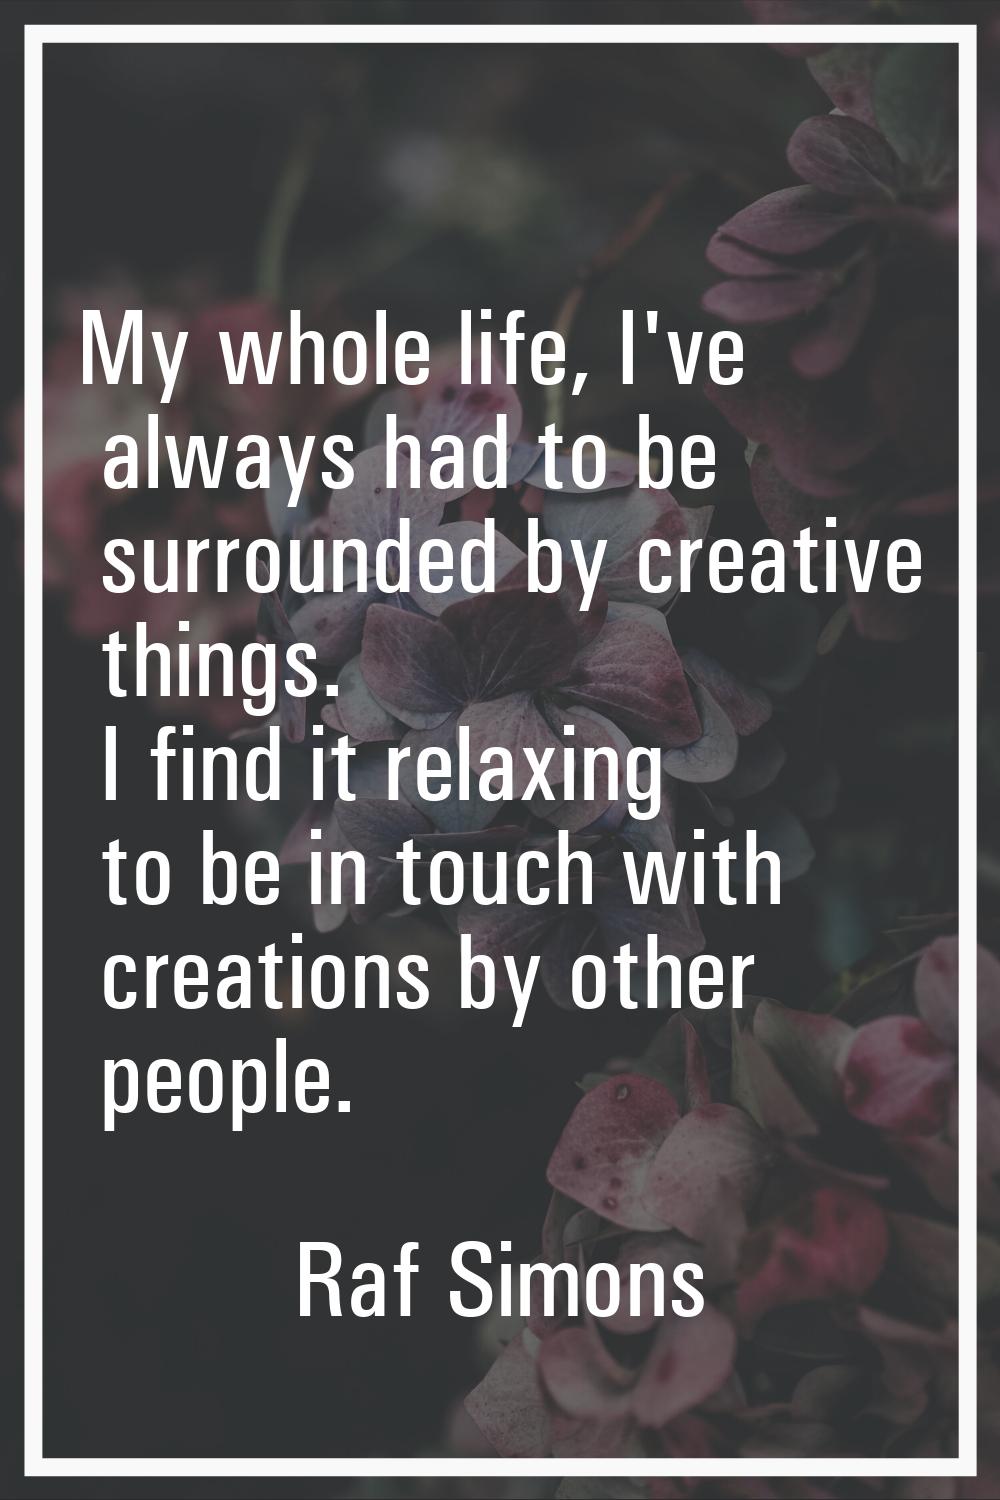 My whole life, I've always had to be surrounded by creative things. I find it relaxing to be in tou